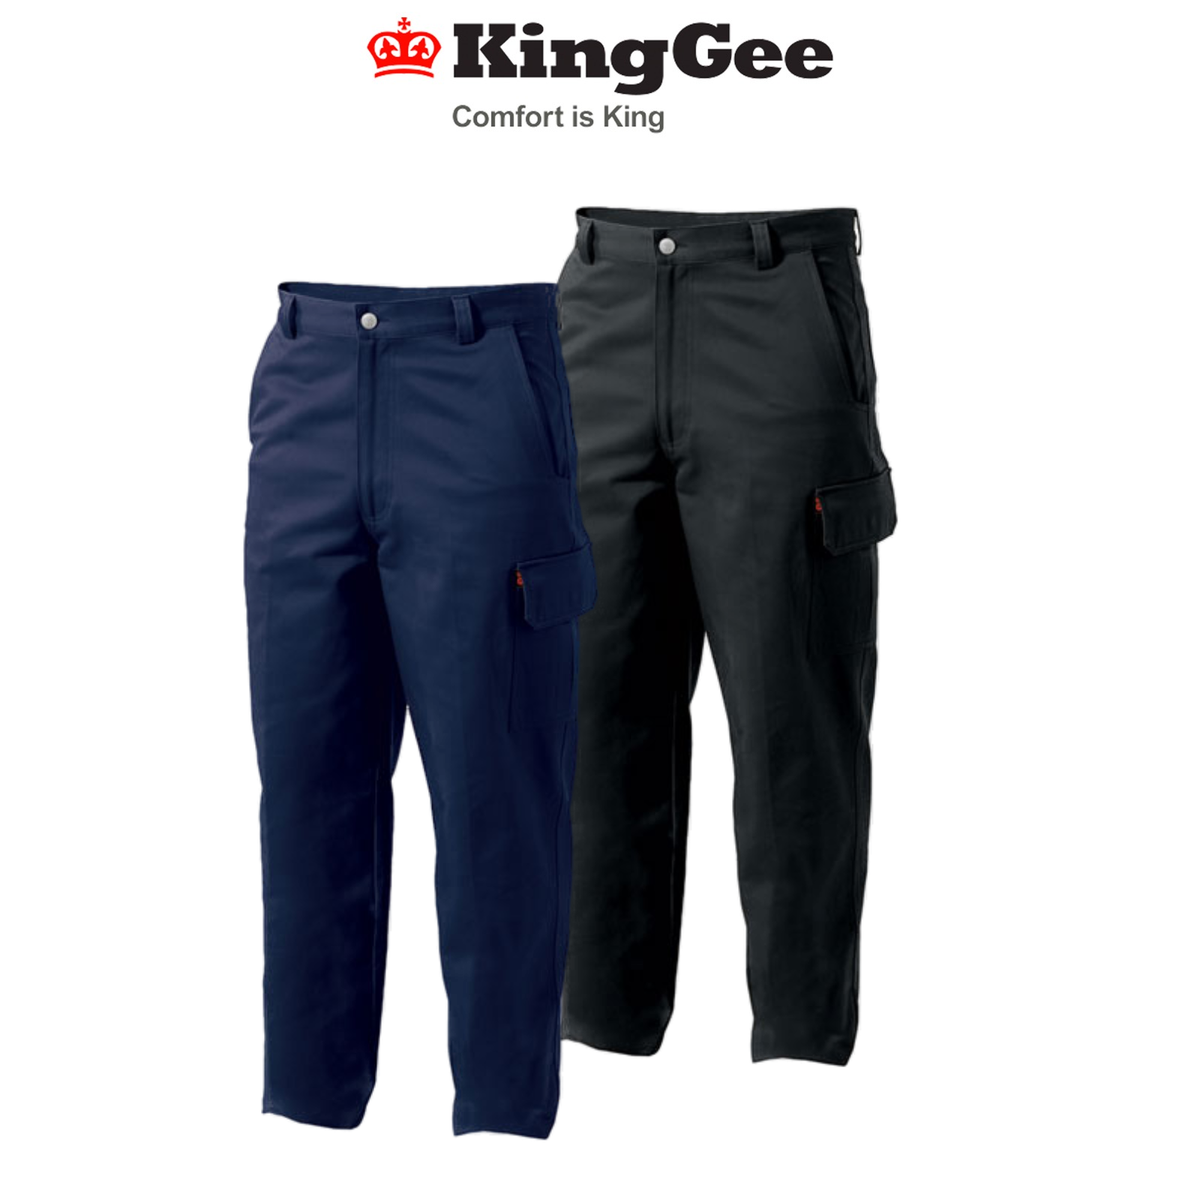 KingGee Mens New G'S Workers Pants Cargo Pocket Work Safety Cotton Comfy K13100